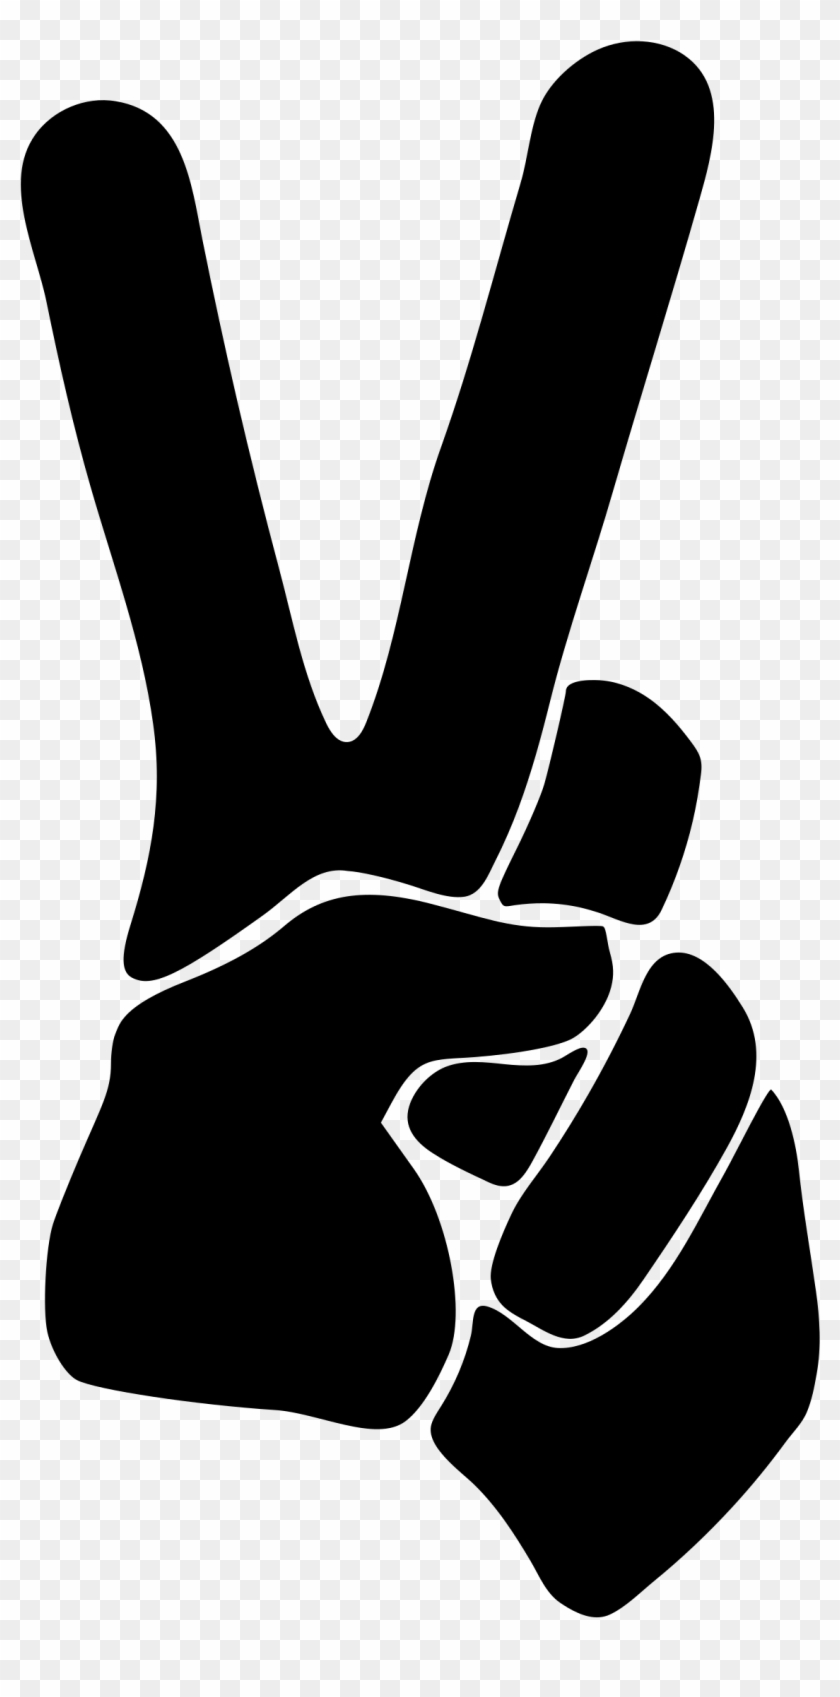 Peace Sign At Getdrawings - Peace Hand Sign Png Clipart #367923